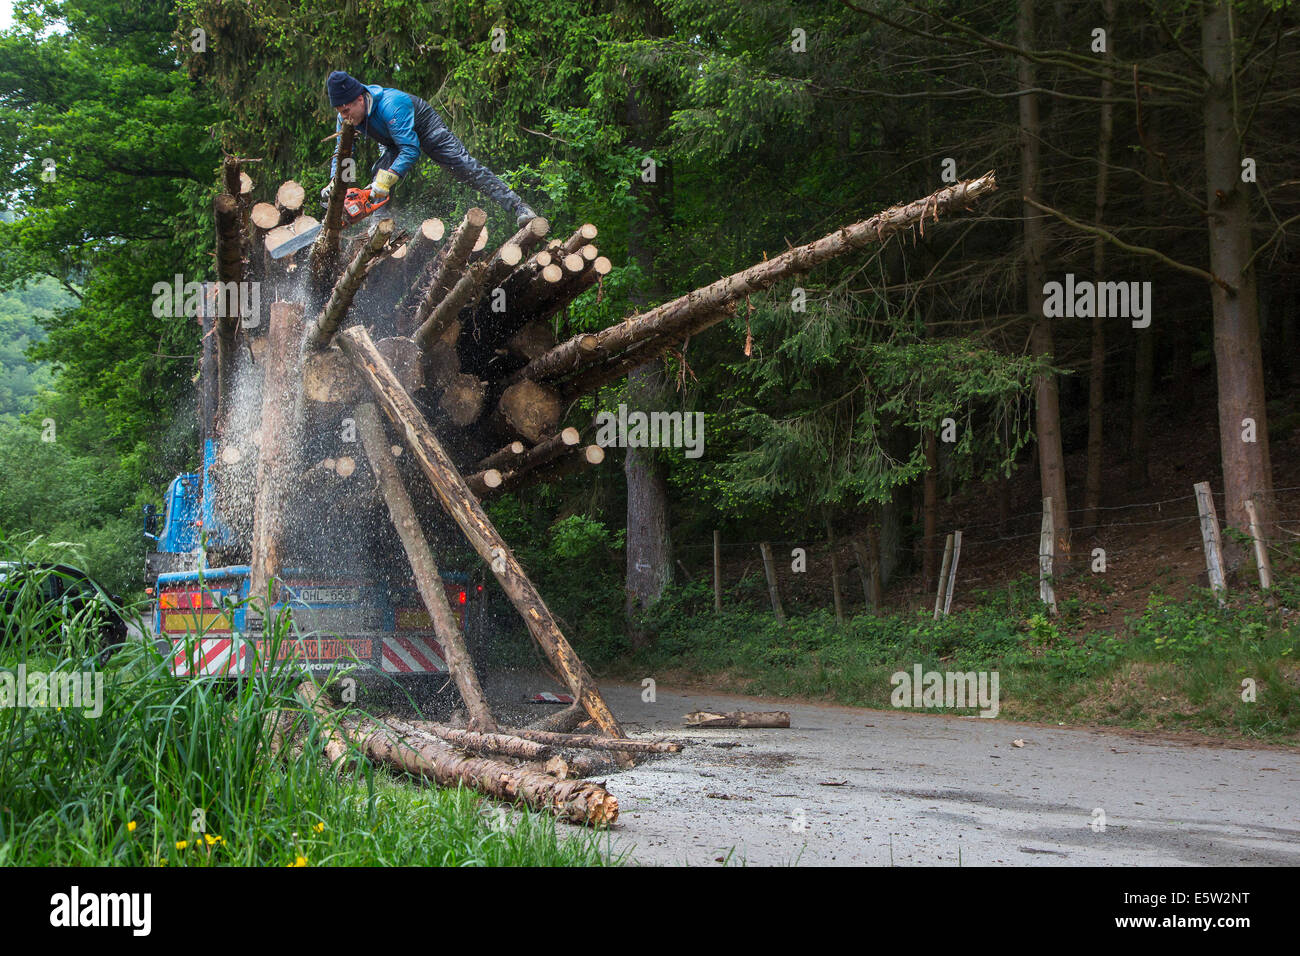 Forester cutting too long logs with chainsaw after loading felled tree trunks on logging truck in forest Stock Photo